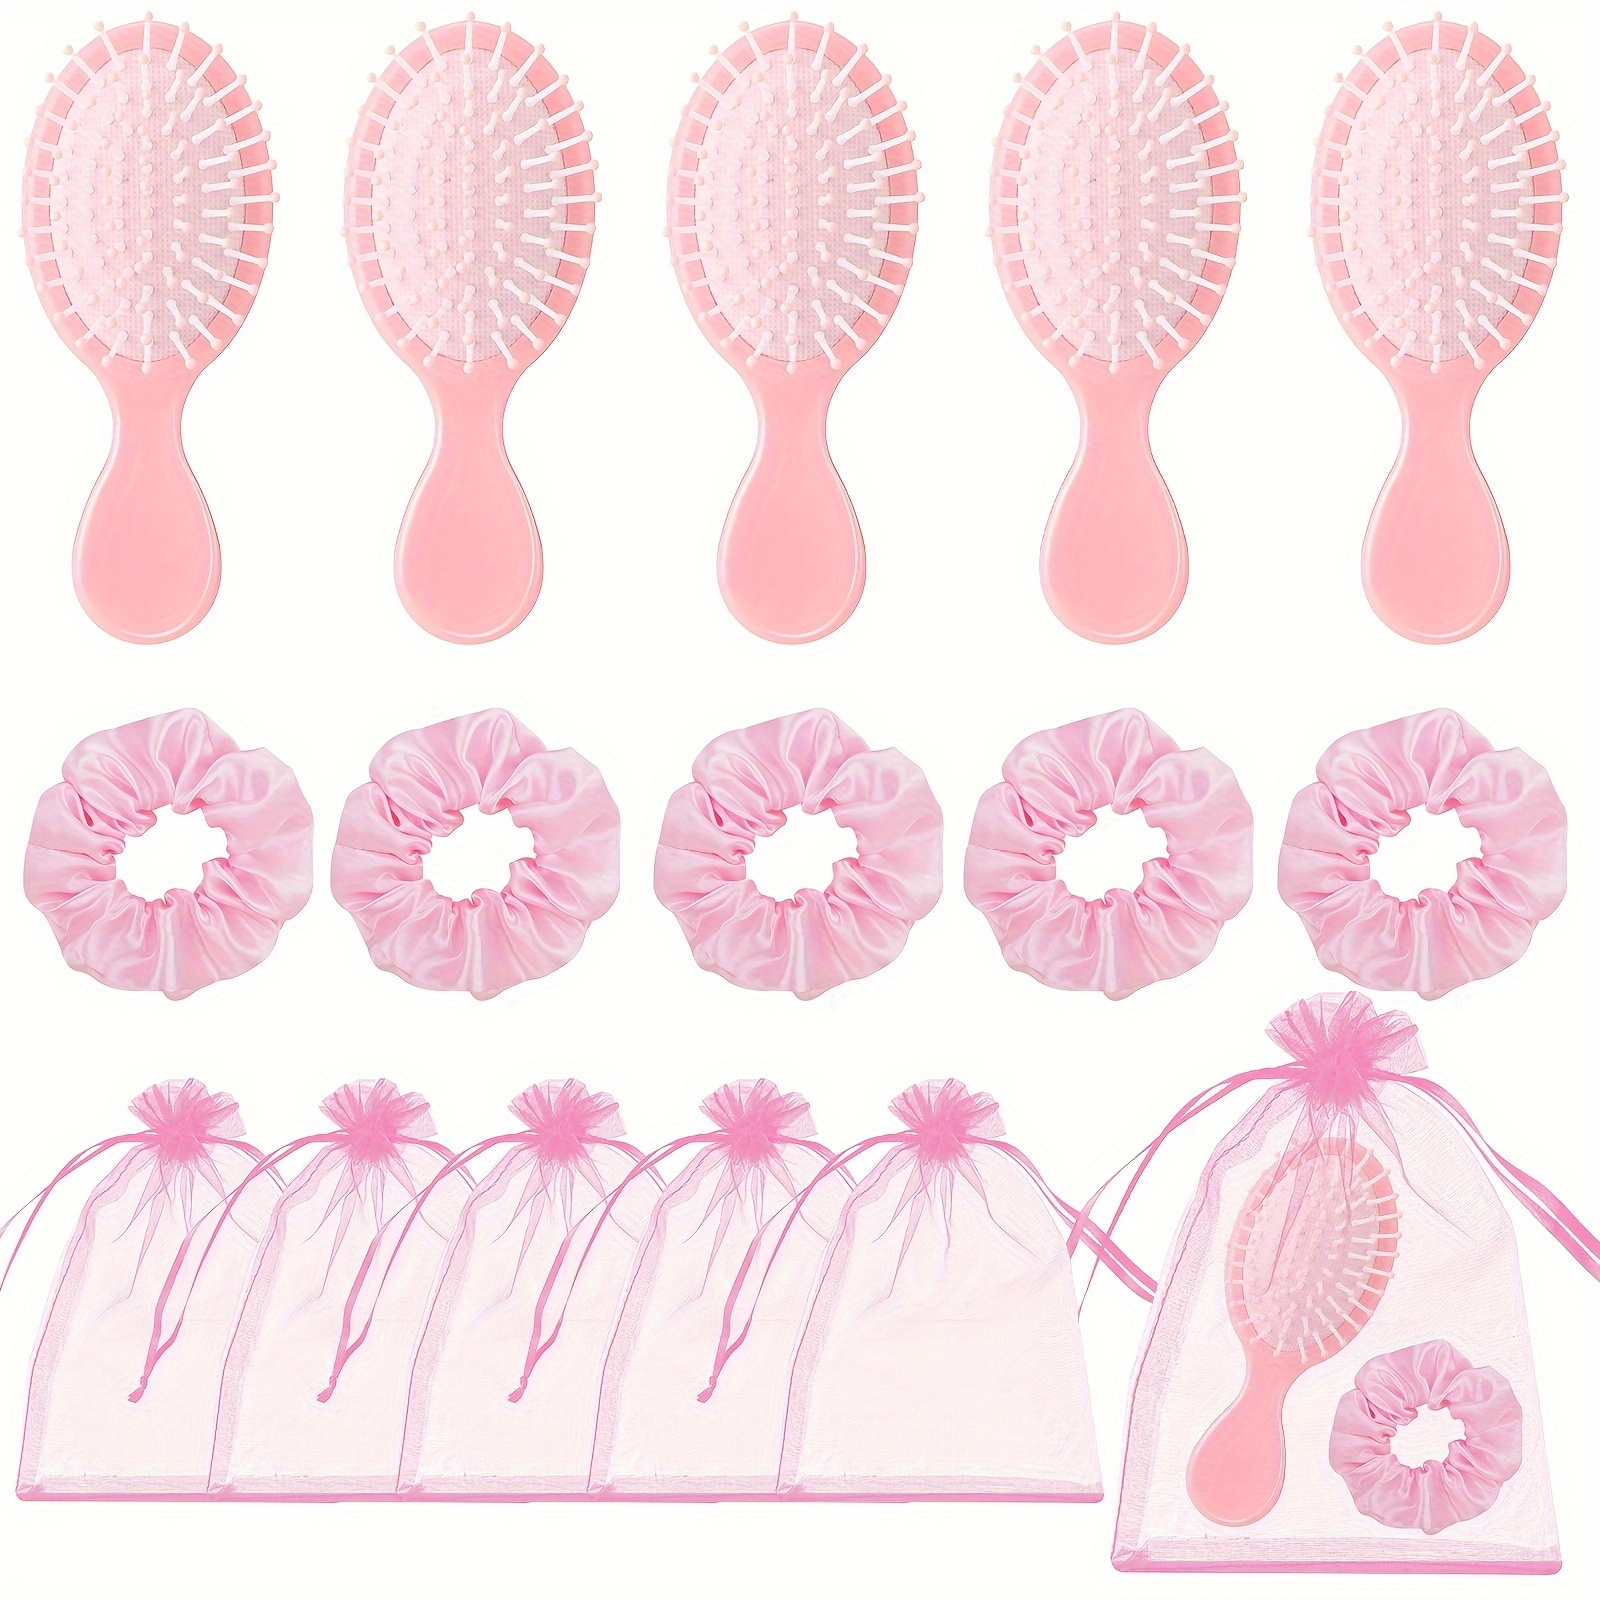 

15 Pcs Hair Care Party Favors Set - Non-electric Plastic Hair Brushes, Scrunchies, And Organza Bags - Ideal For Spa, Sleepover Parties, Makeup Themed Events